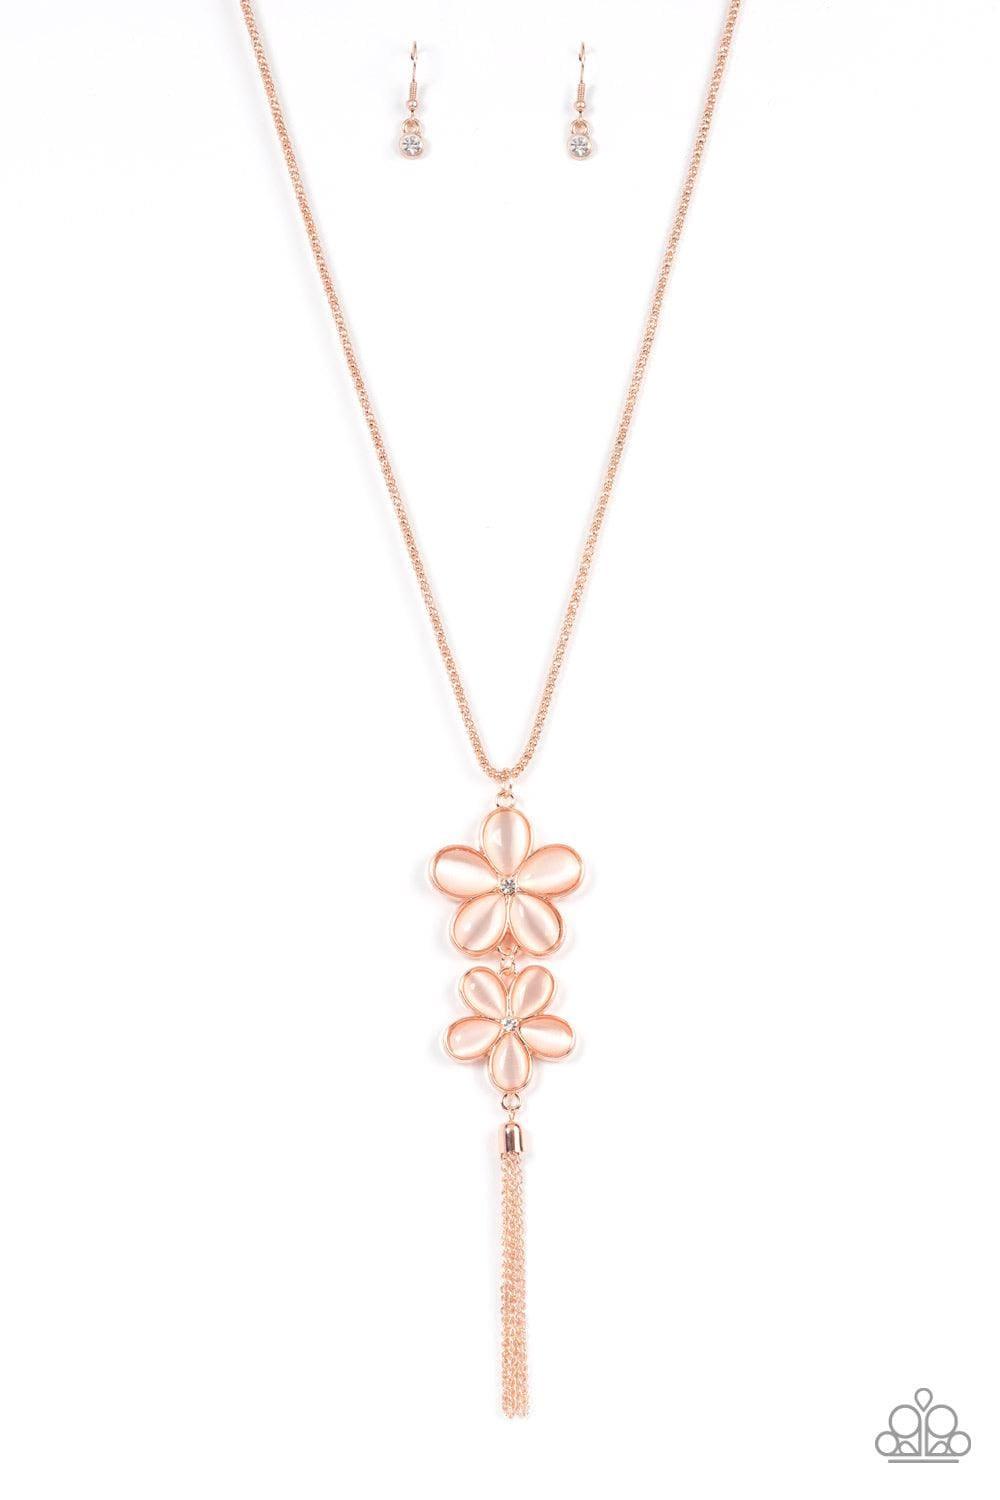 Paparazzi Accessories - Perennial Powerhouse - Rose Gold Necklace - Bling by JessieK